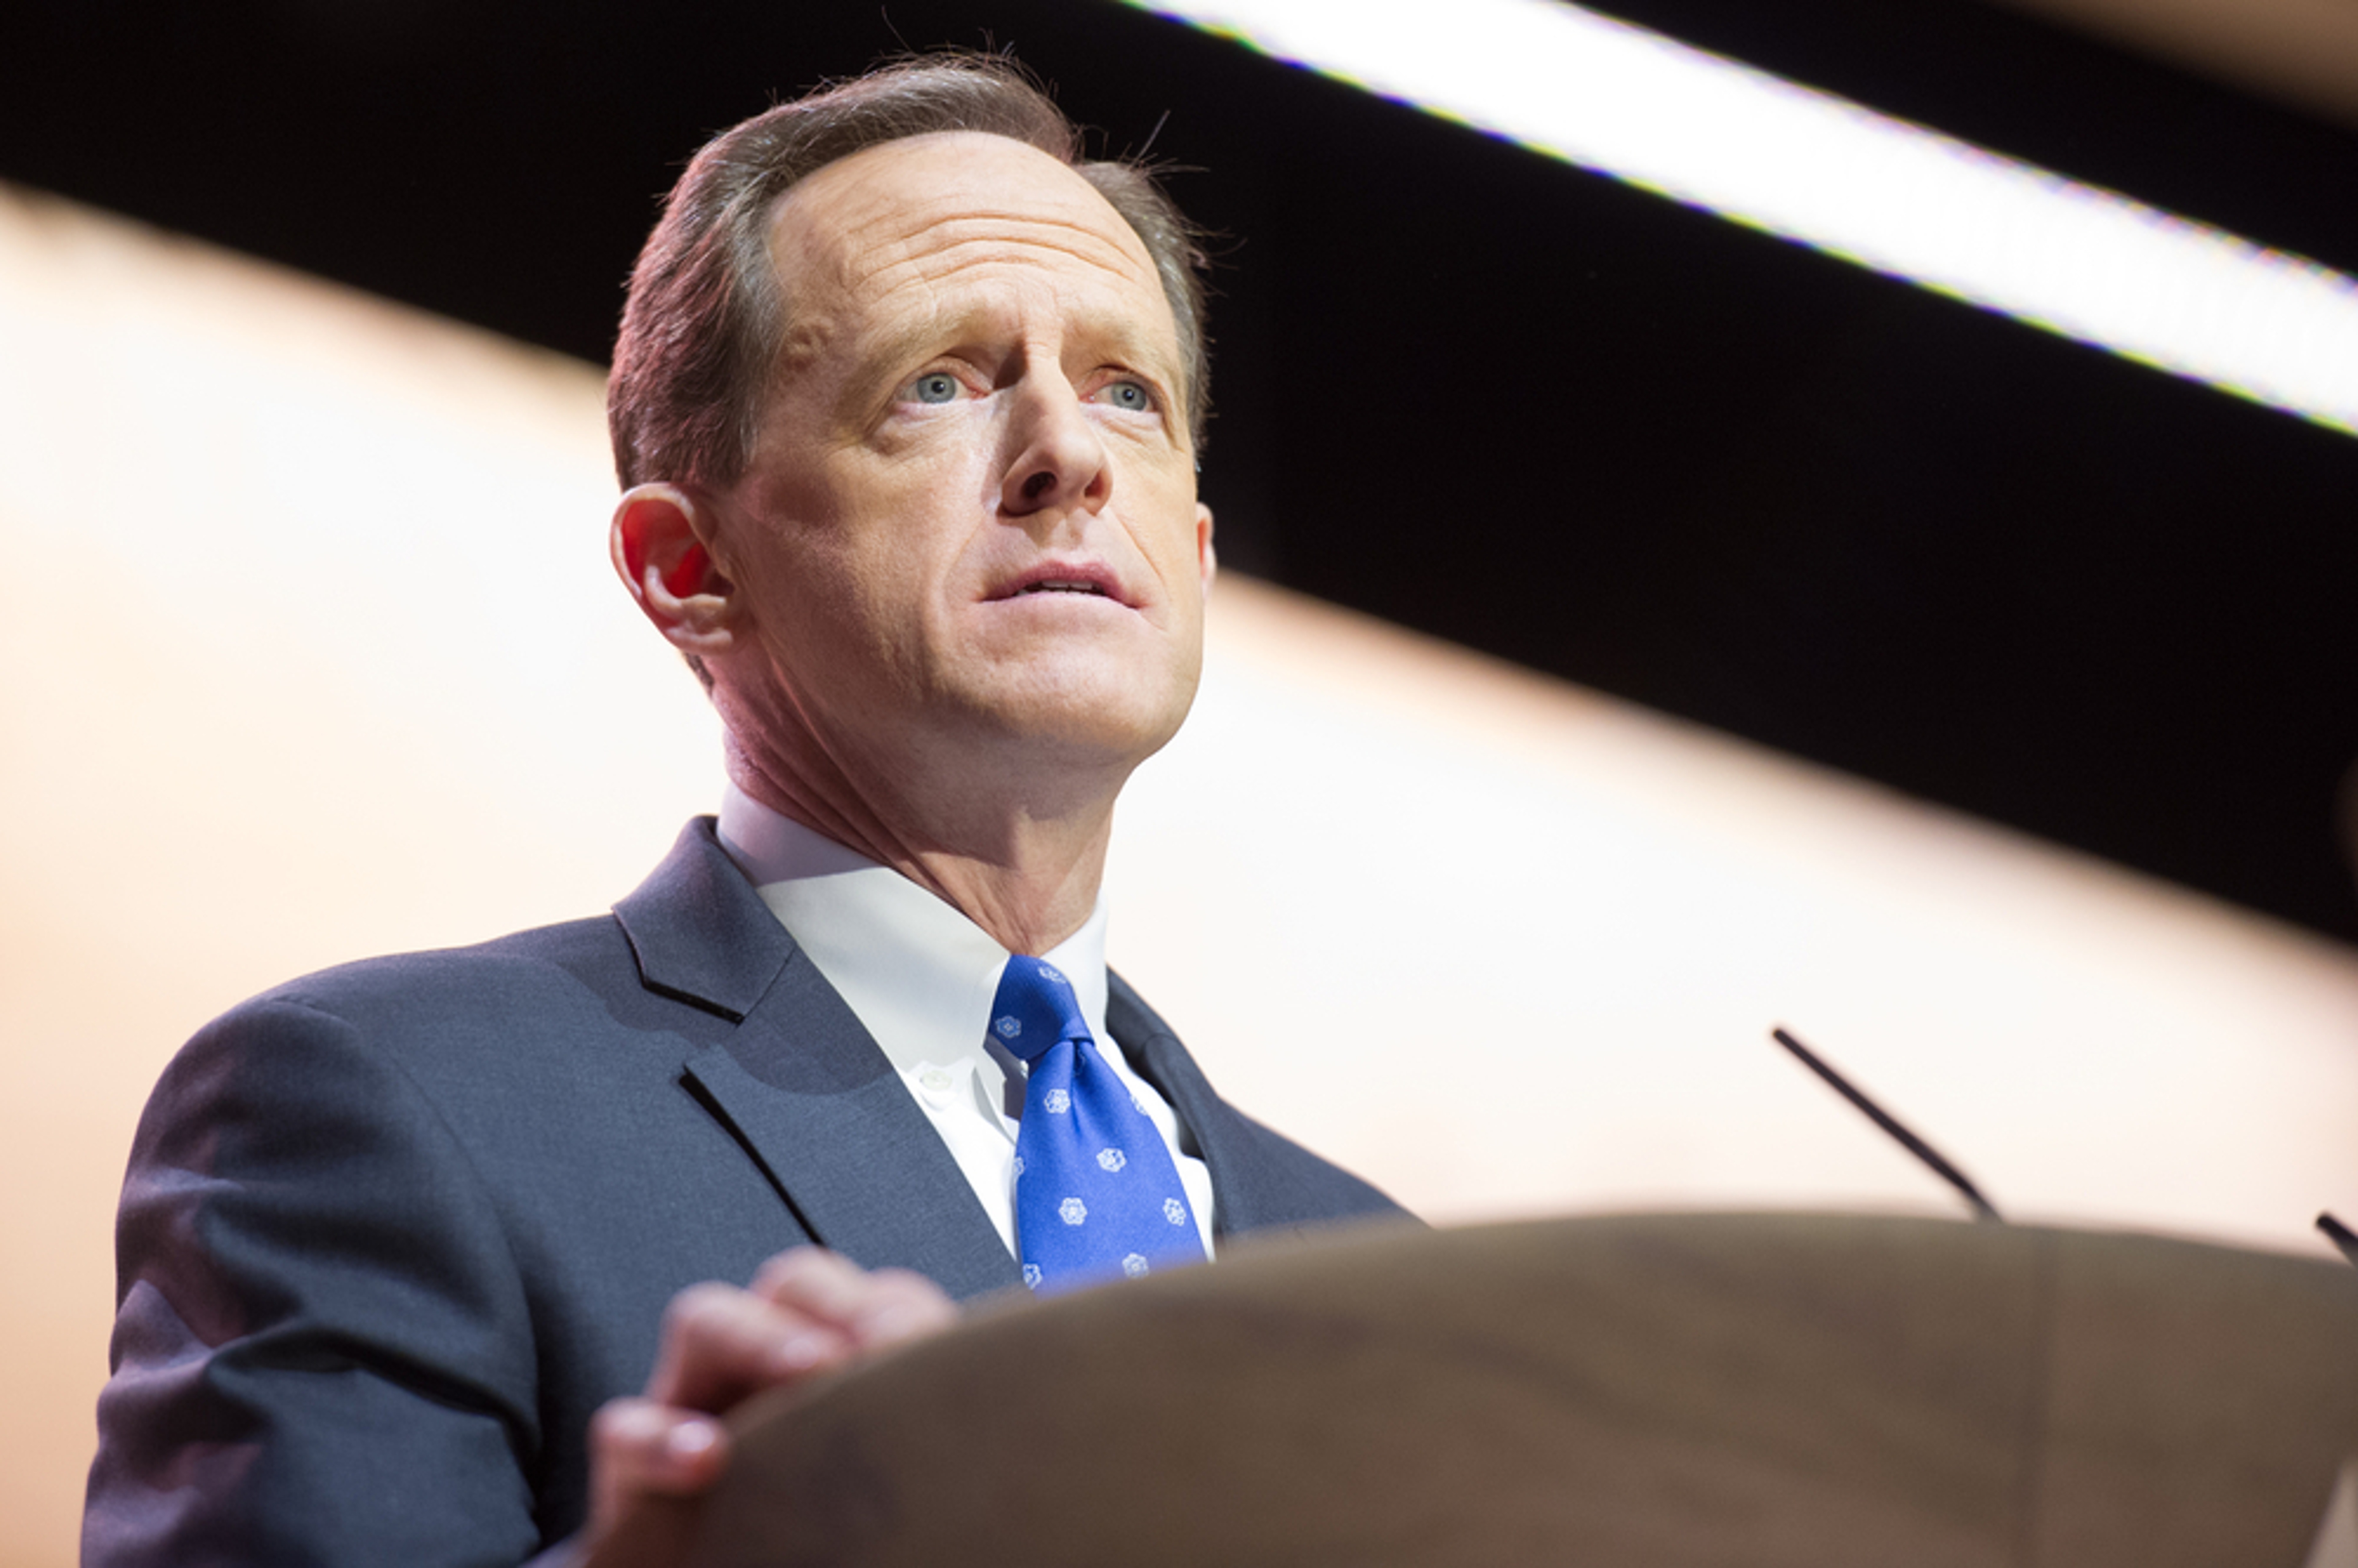 Pro-Crypto Senator Pat Toomey Submits Bill to Regulate Stablecoins Ahead Of Retirement